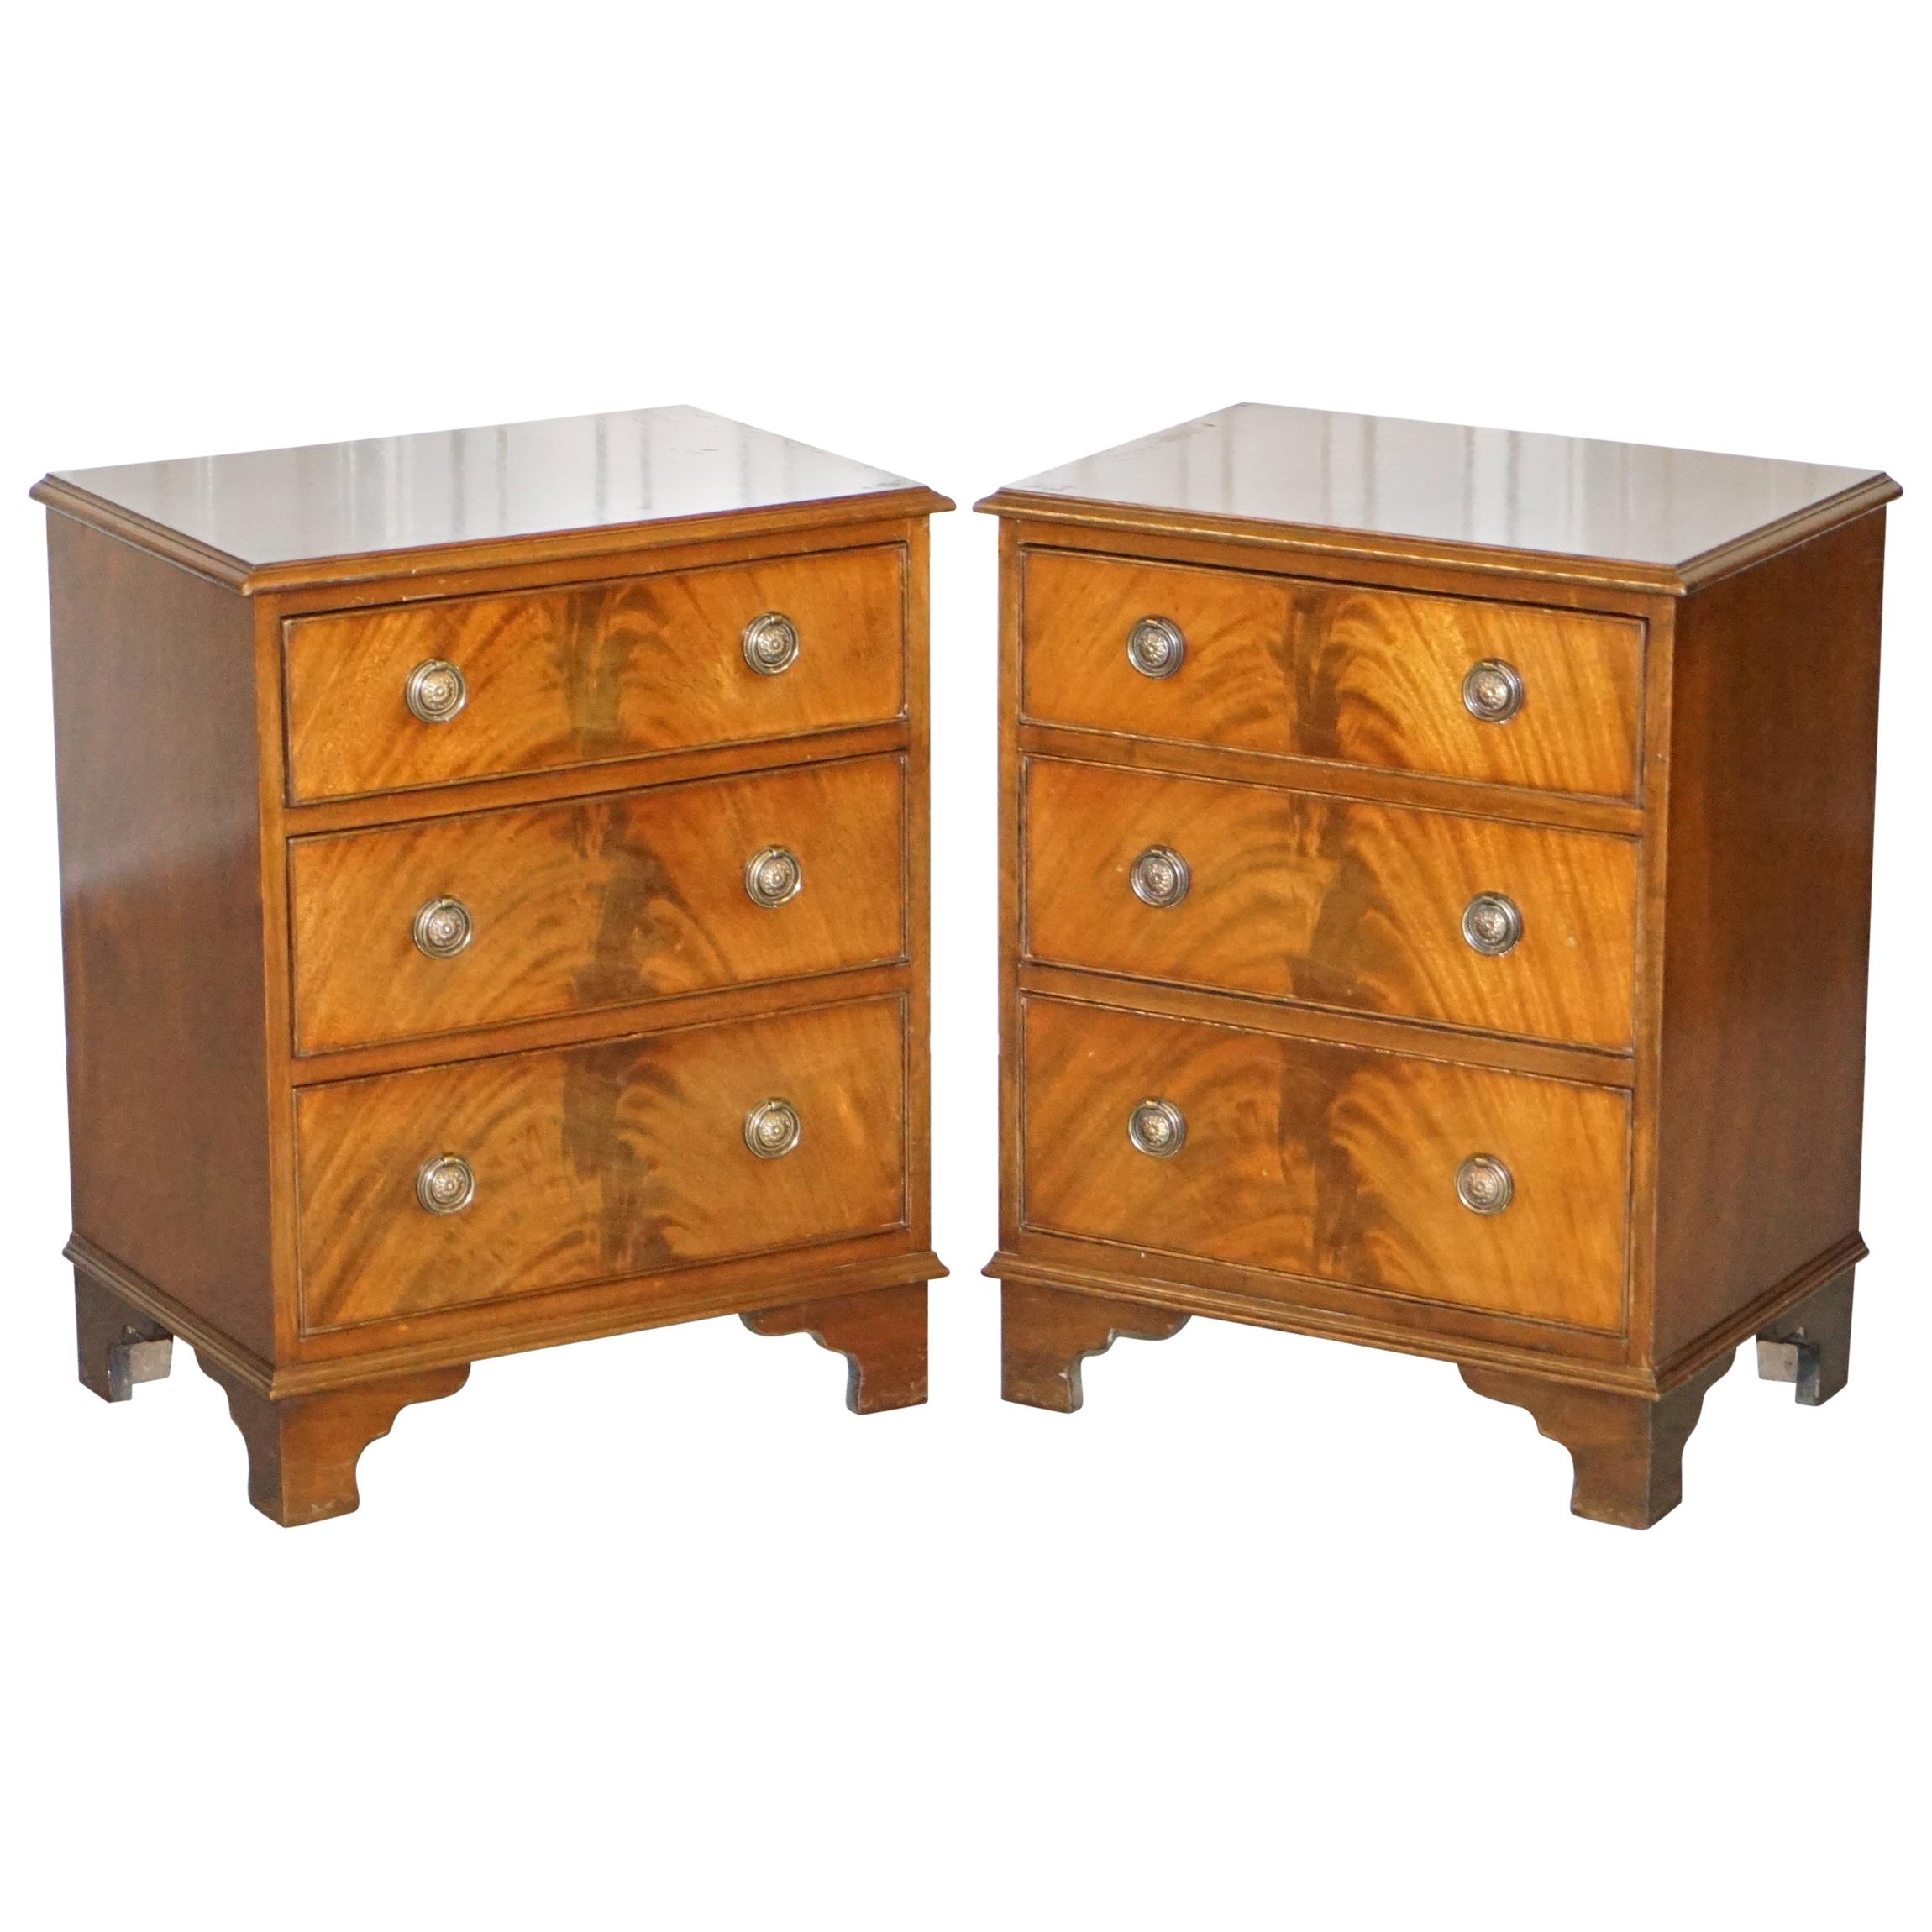 Stunning Pair of Flamed Hardwood Bedside Lamp Wine Table Sized Chests of Drawers